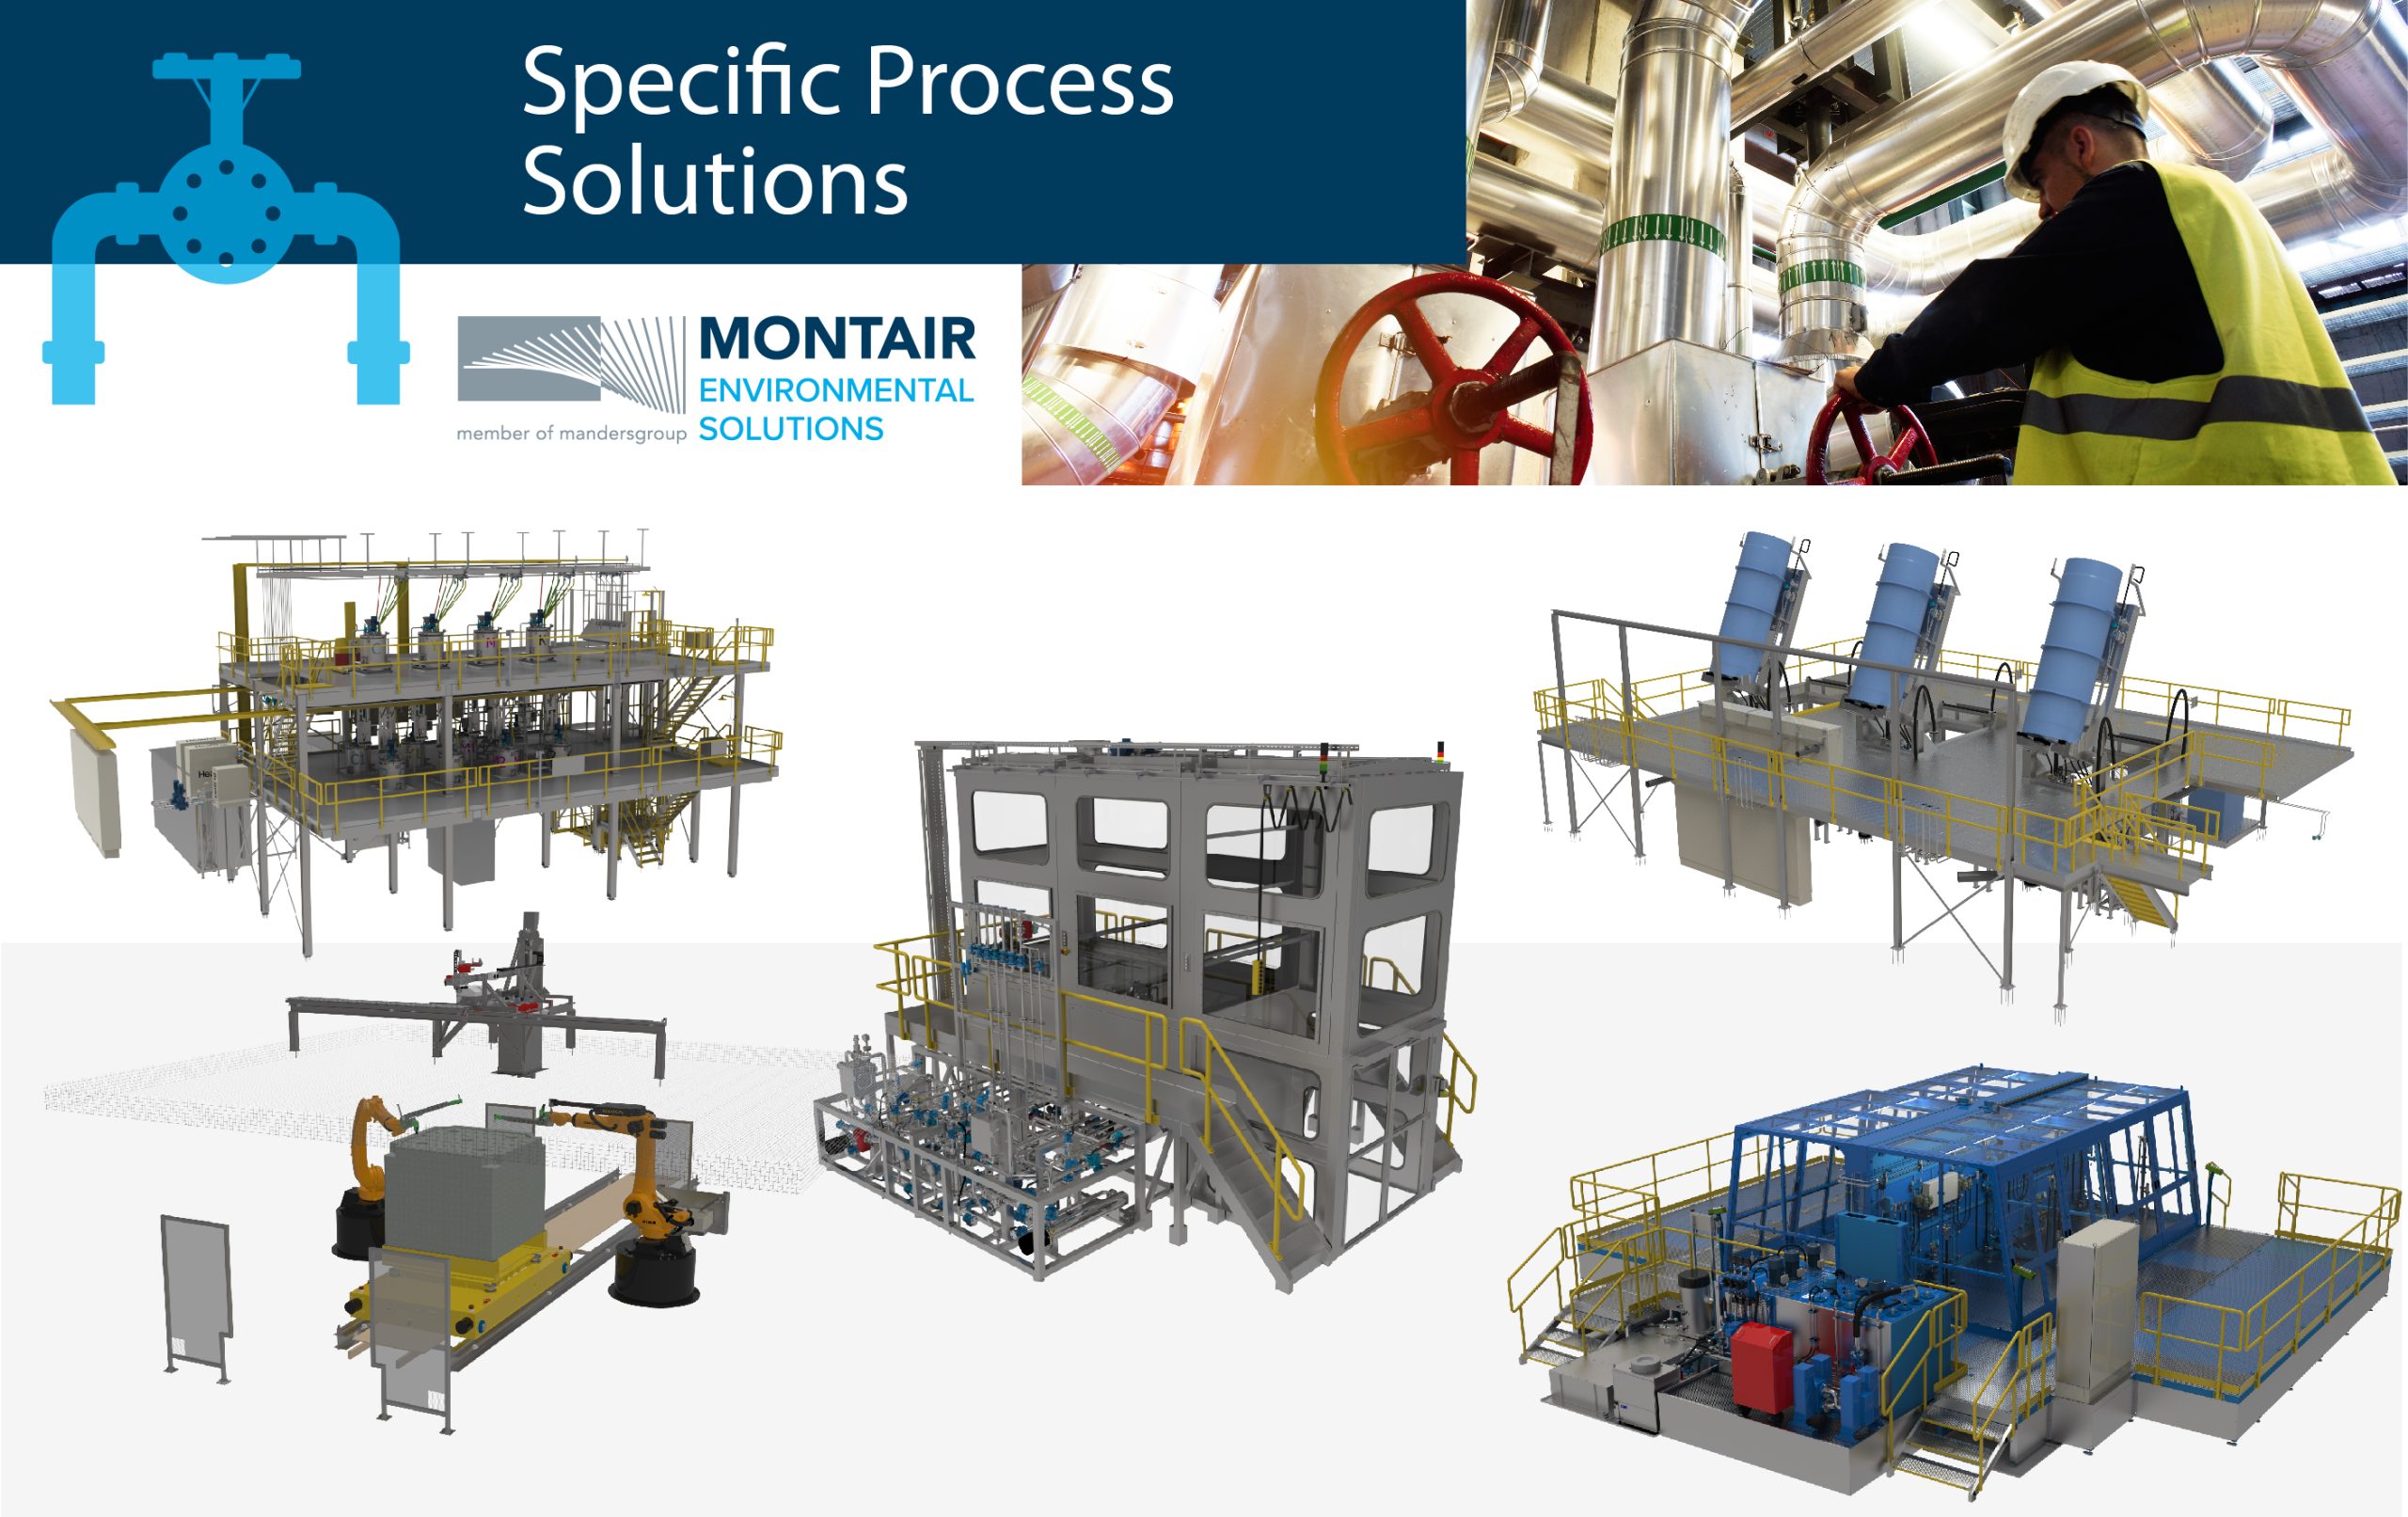 Montair Environmental Solutions - Specific Process Solutions